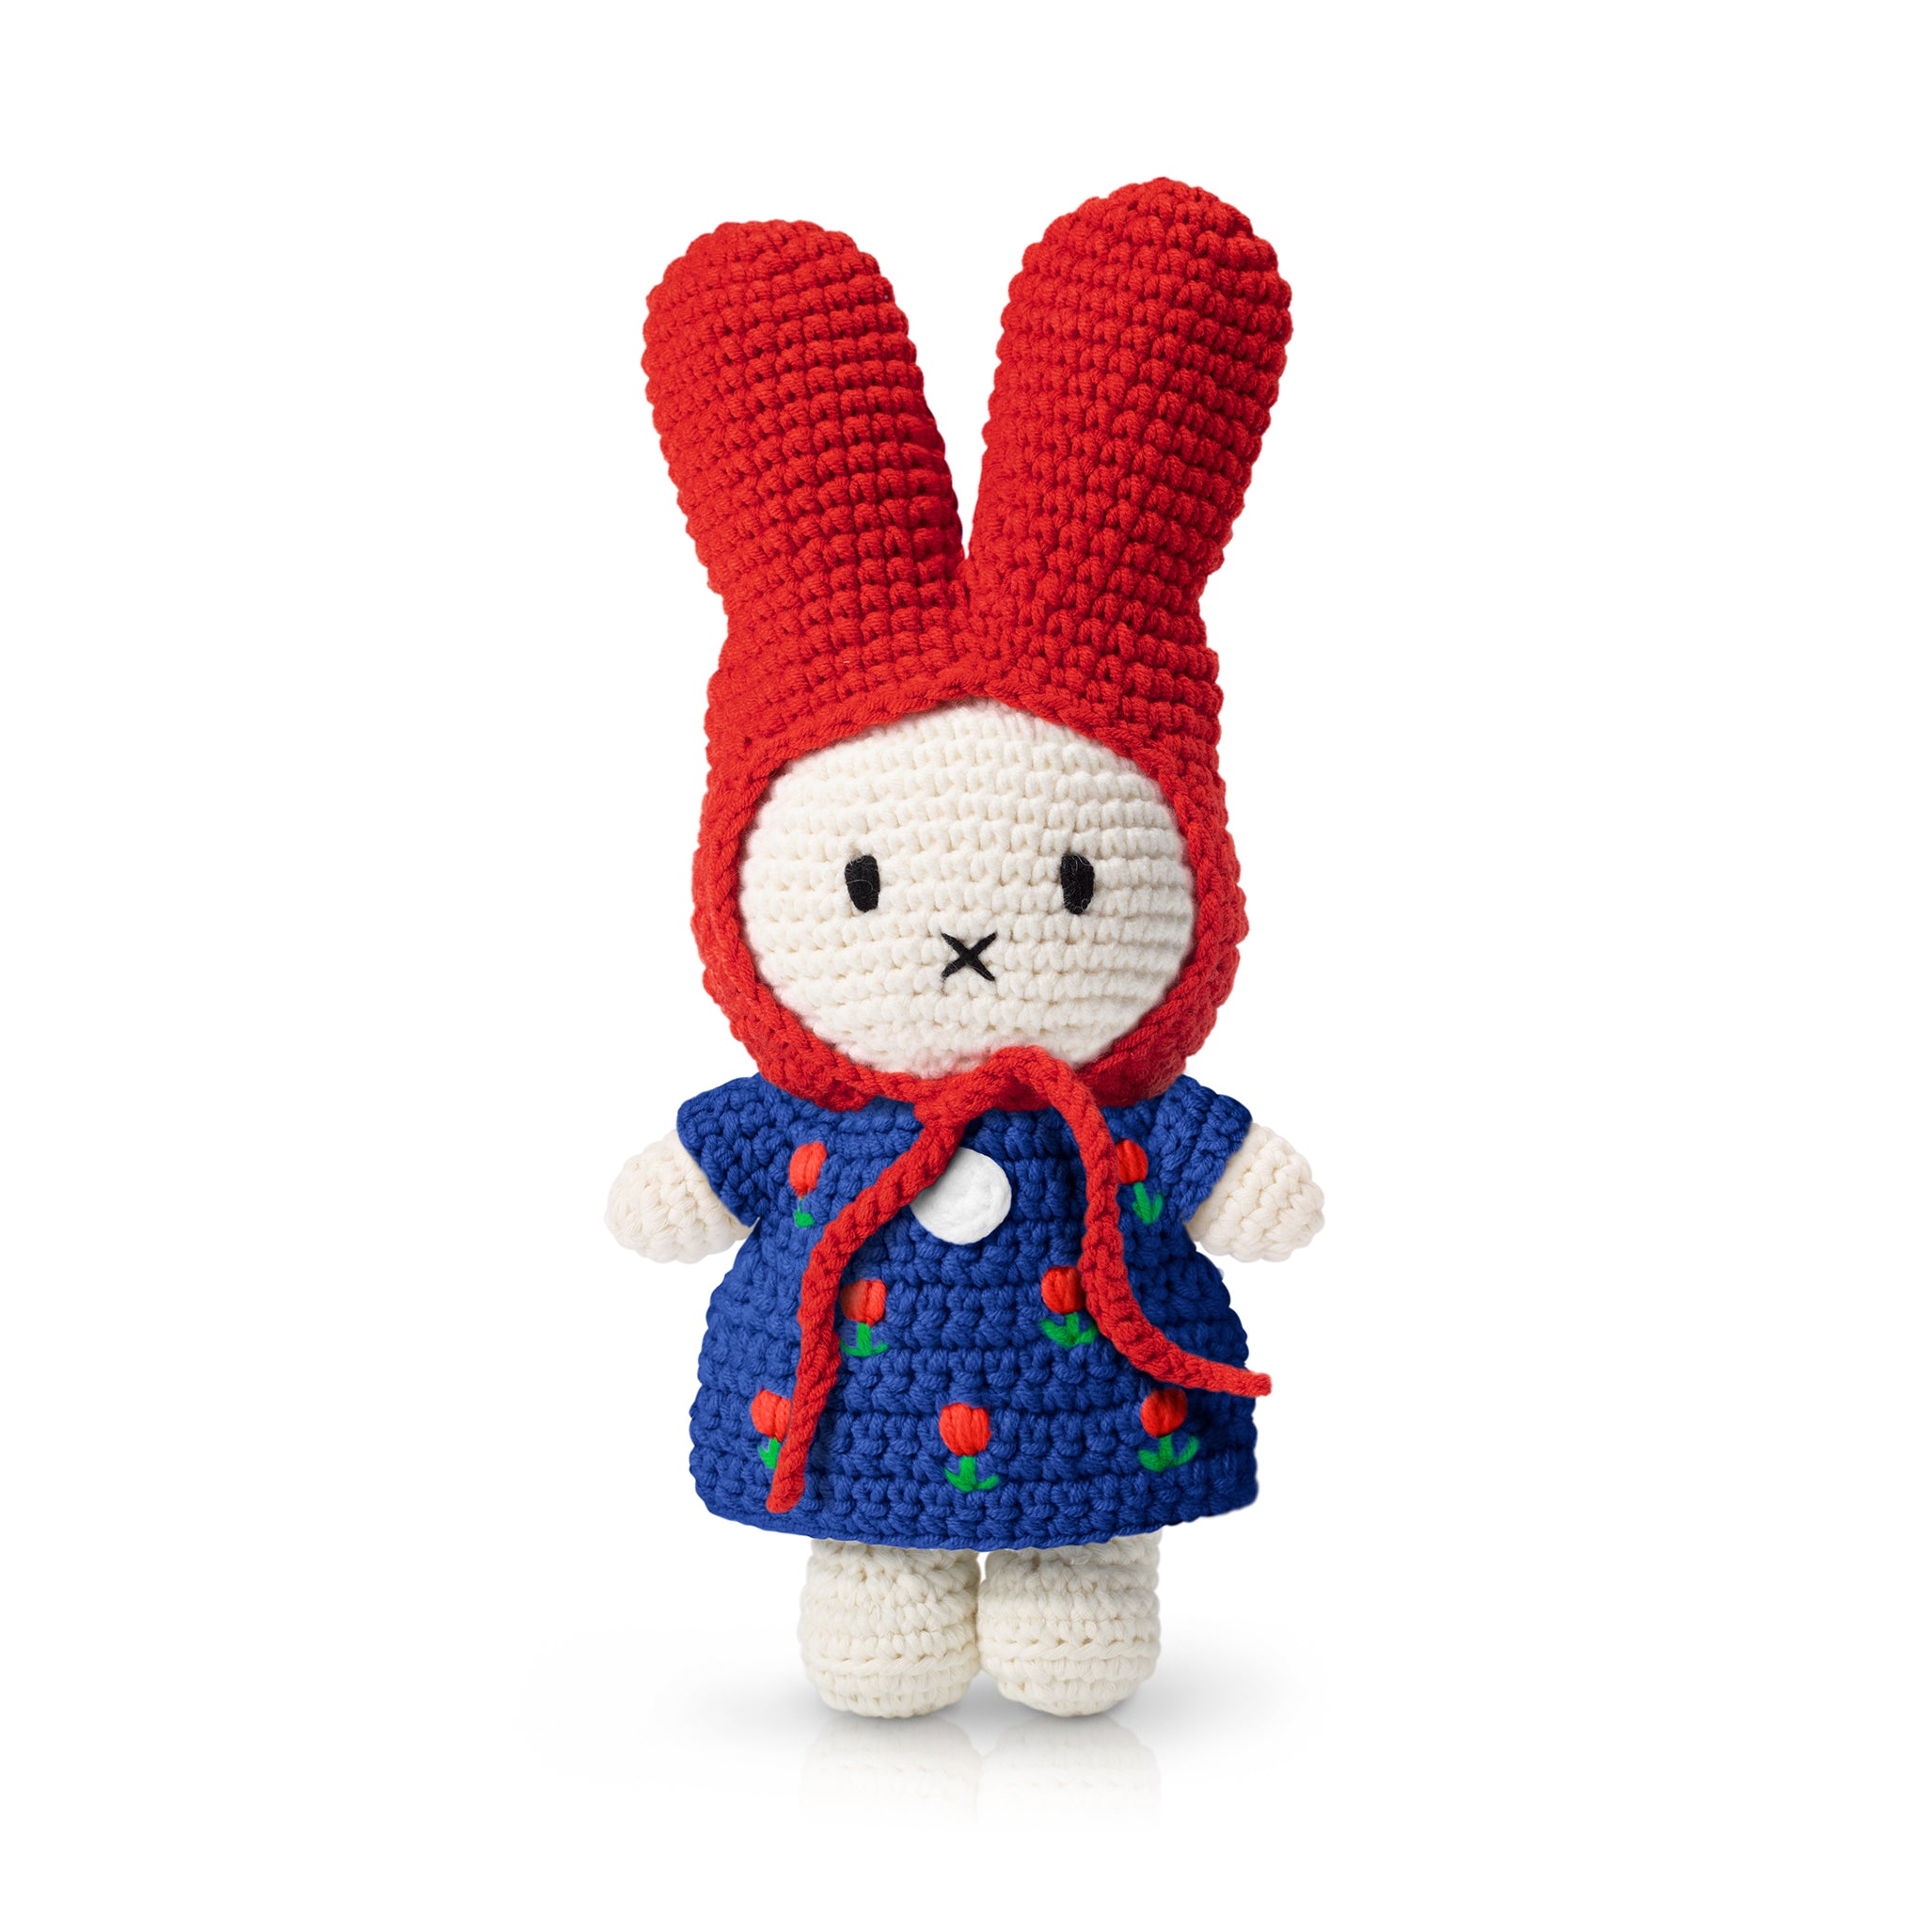 Handmade Miffy - Blue tulip dress and red hat